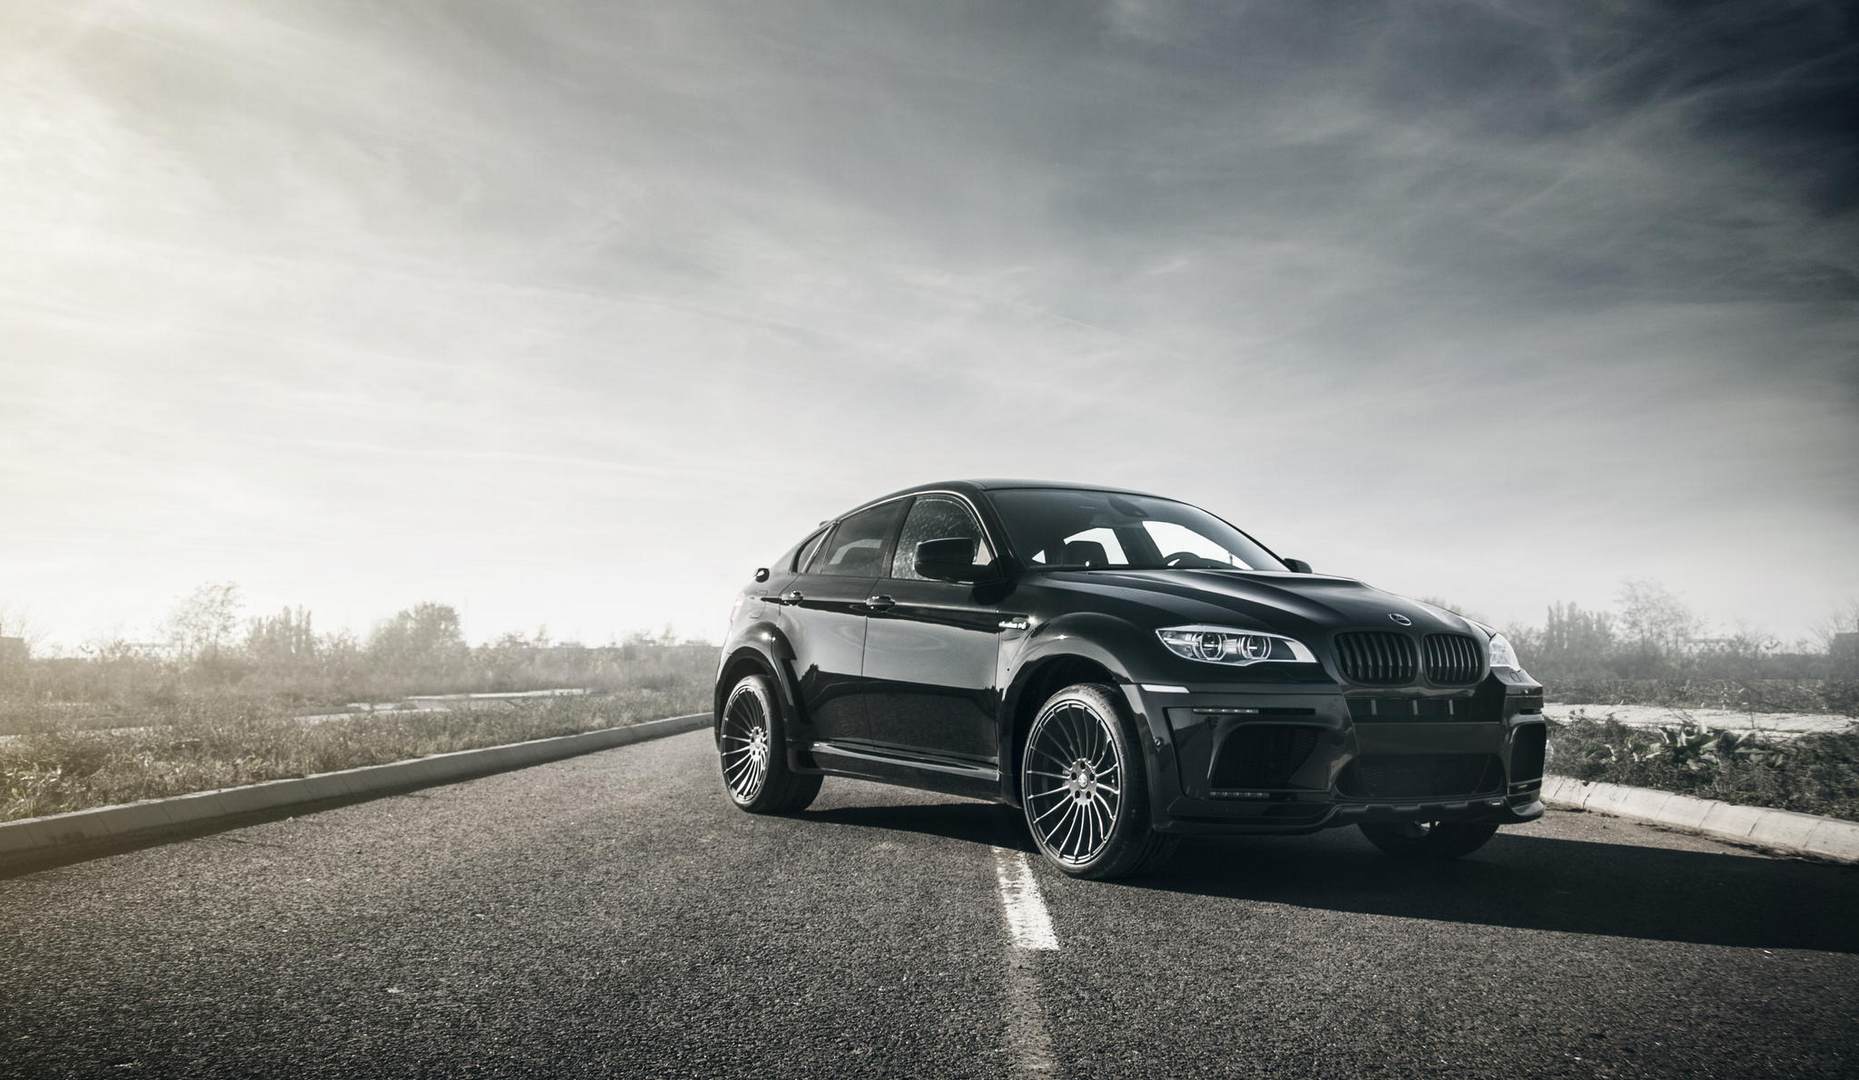 Bmw X6 Wallpapers